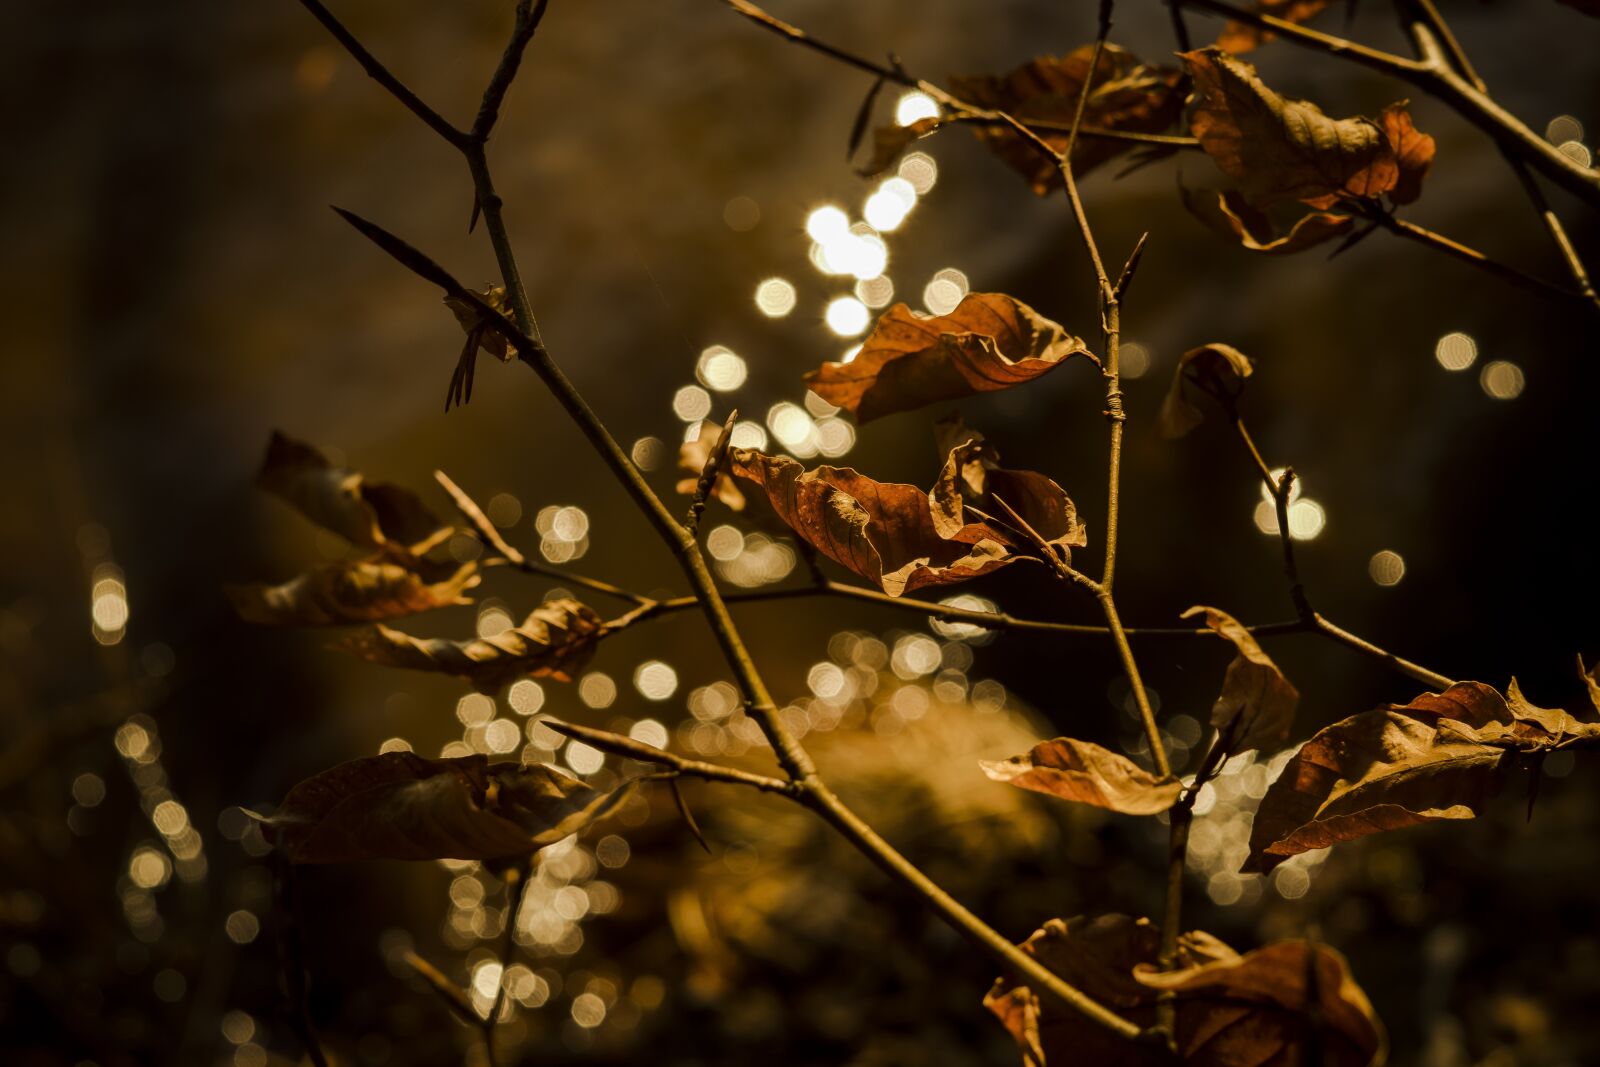 Sony a6300 sample photo. Leaves, reflections, fall foliage photography